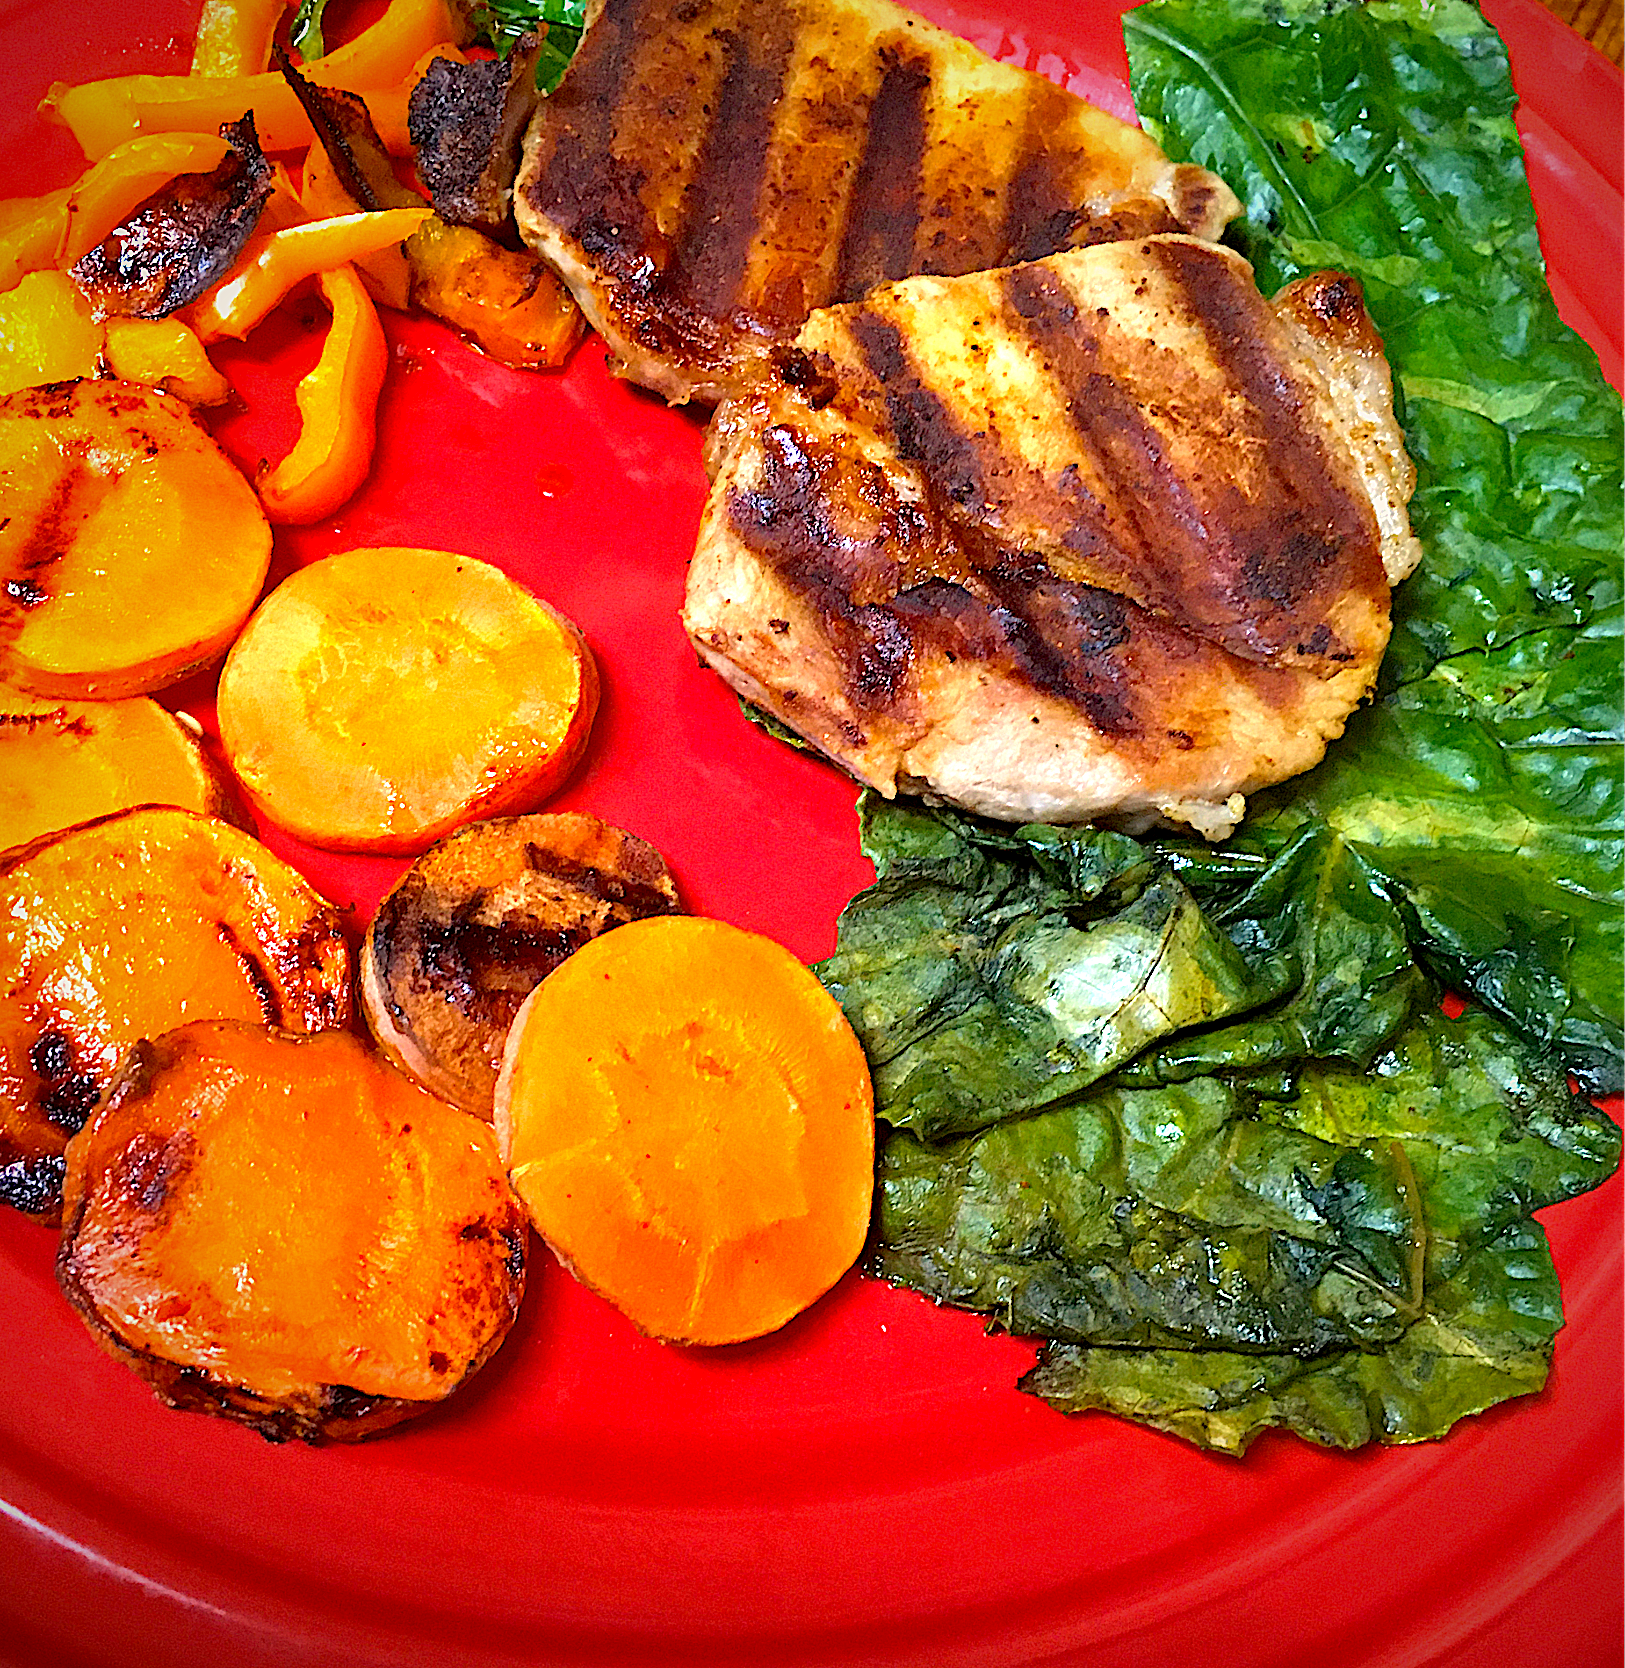 BBQ Grilled Pork Loin, Grilled Carrots and Yellow Bell Peppers & Fresh Kale